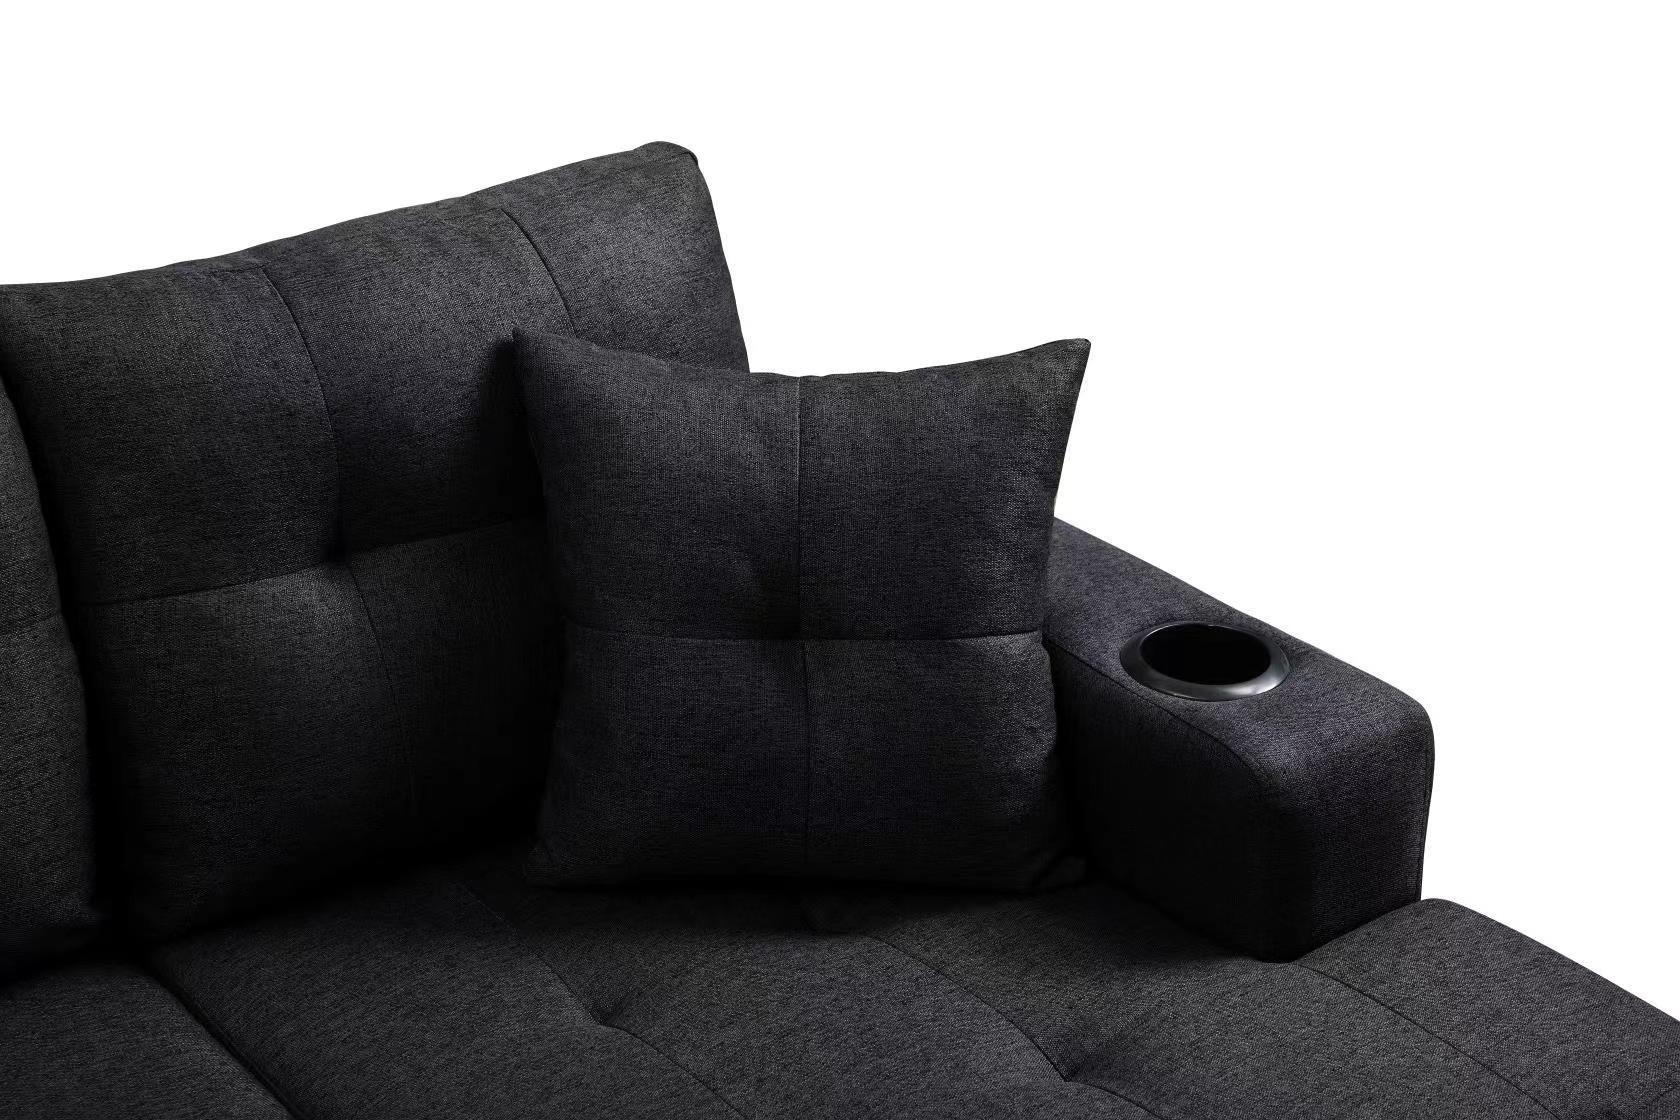 MEGA right sectional sofa with footrest, convertible black-foam-fabric